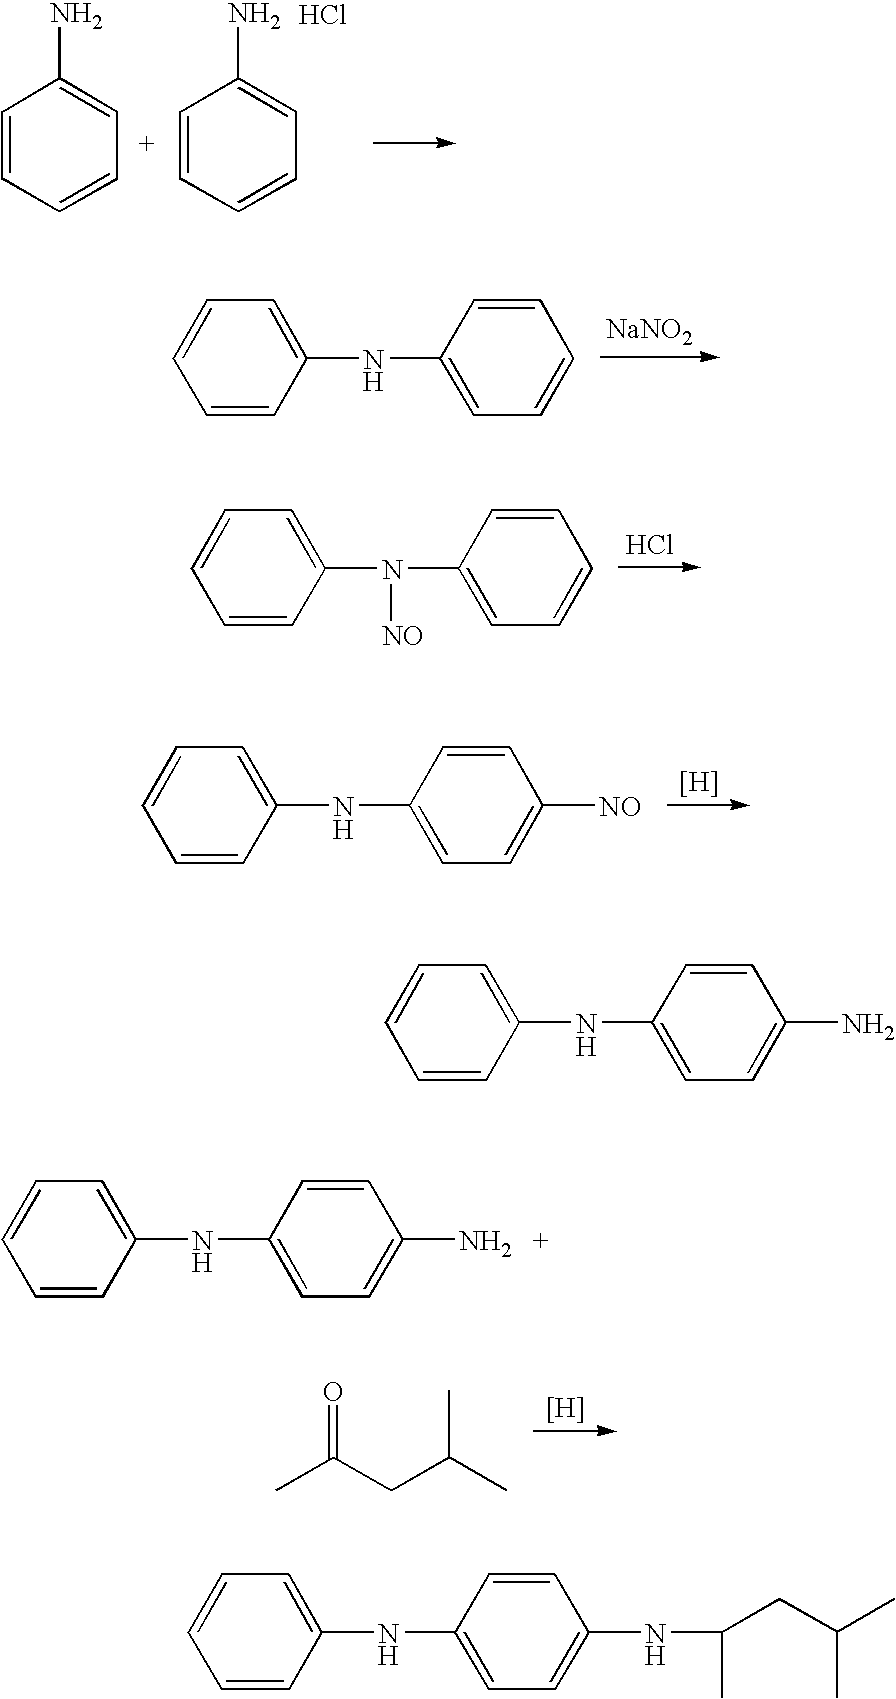 Process for producing antiaging agent, vulcanization accelerator or modified natural rubber by means of microorganism or plant